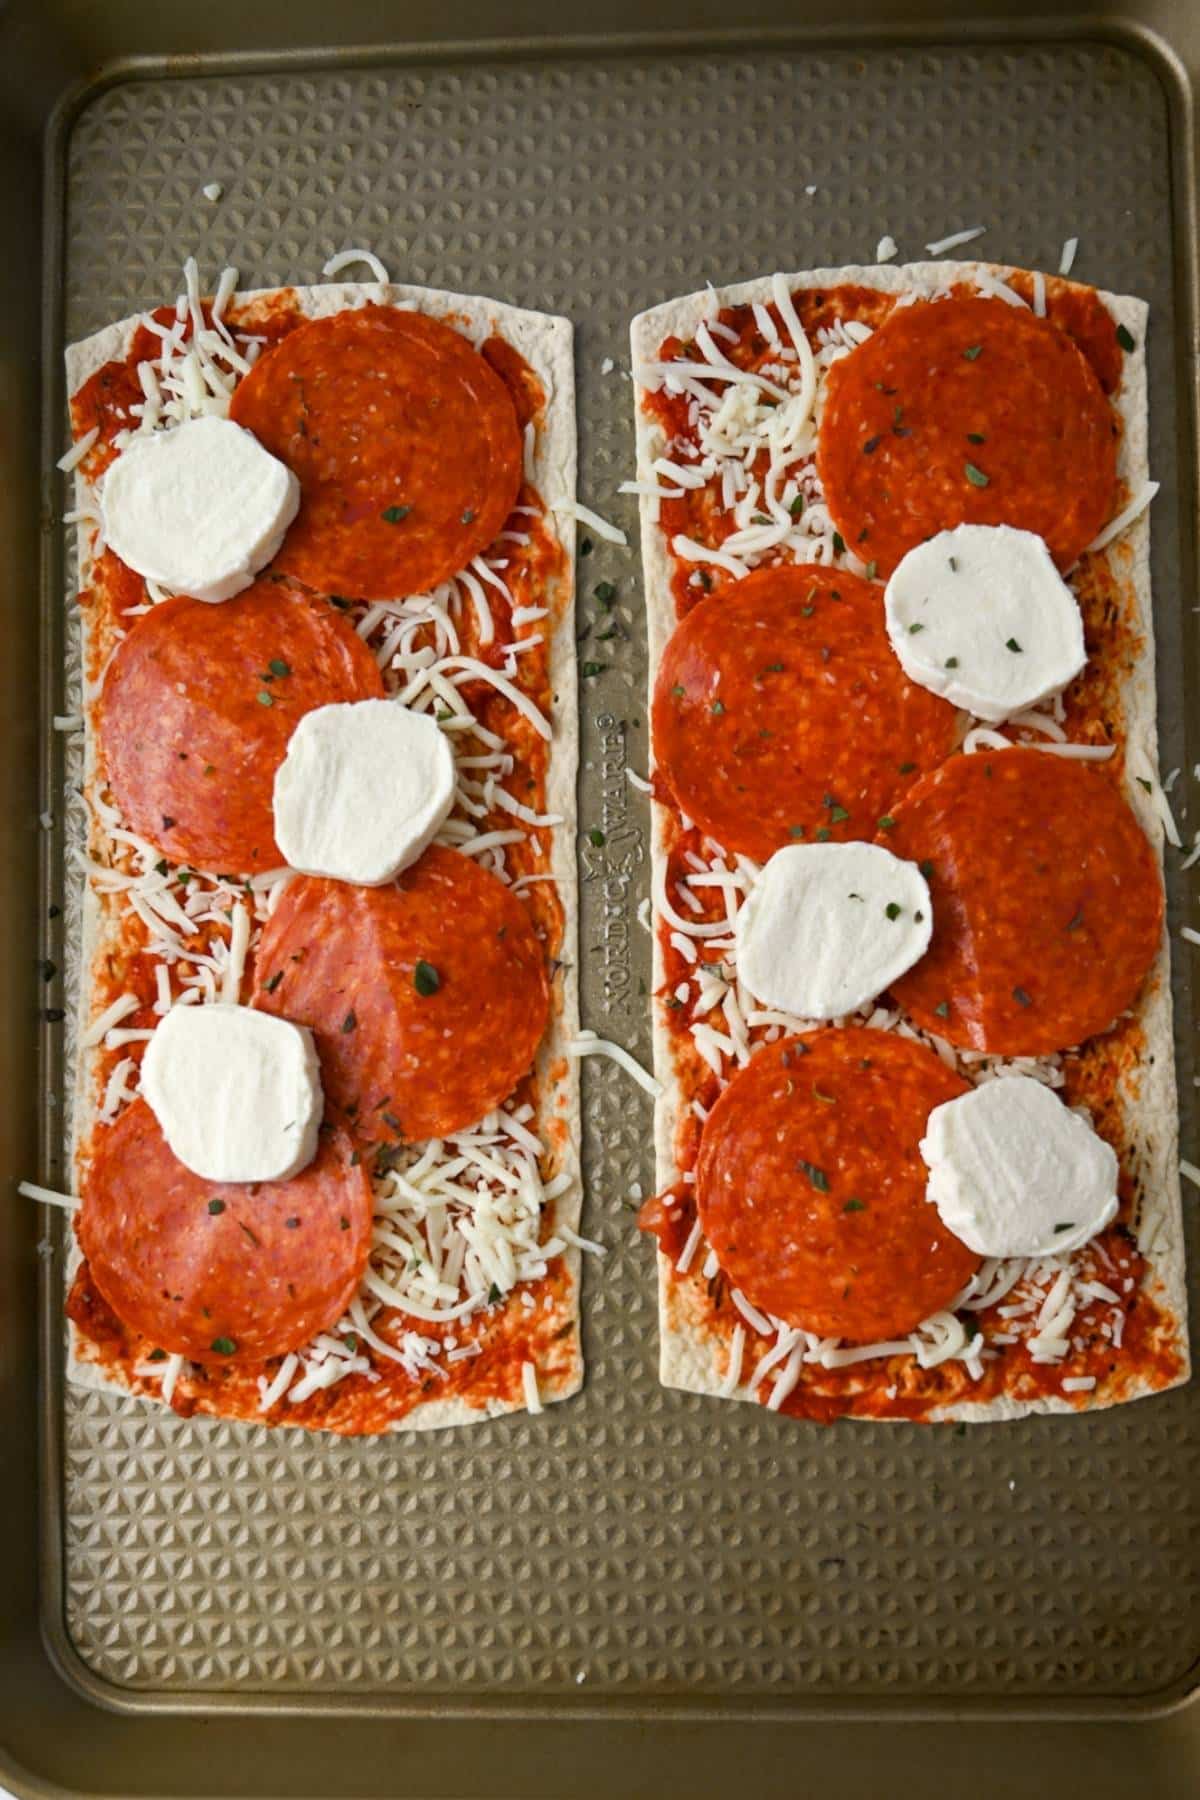 two flatbreads topped with cheese and pepperoni ready to bake